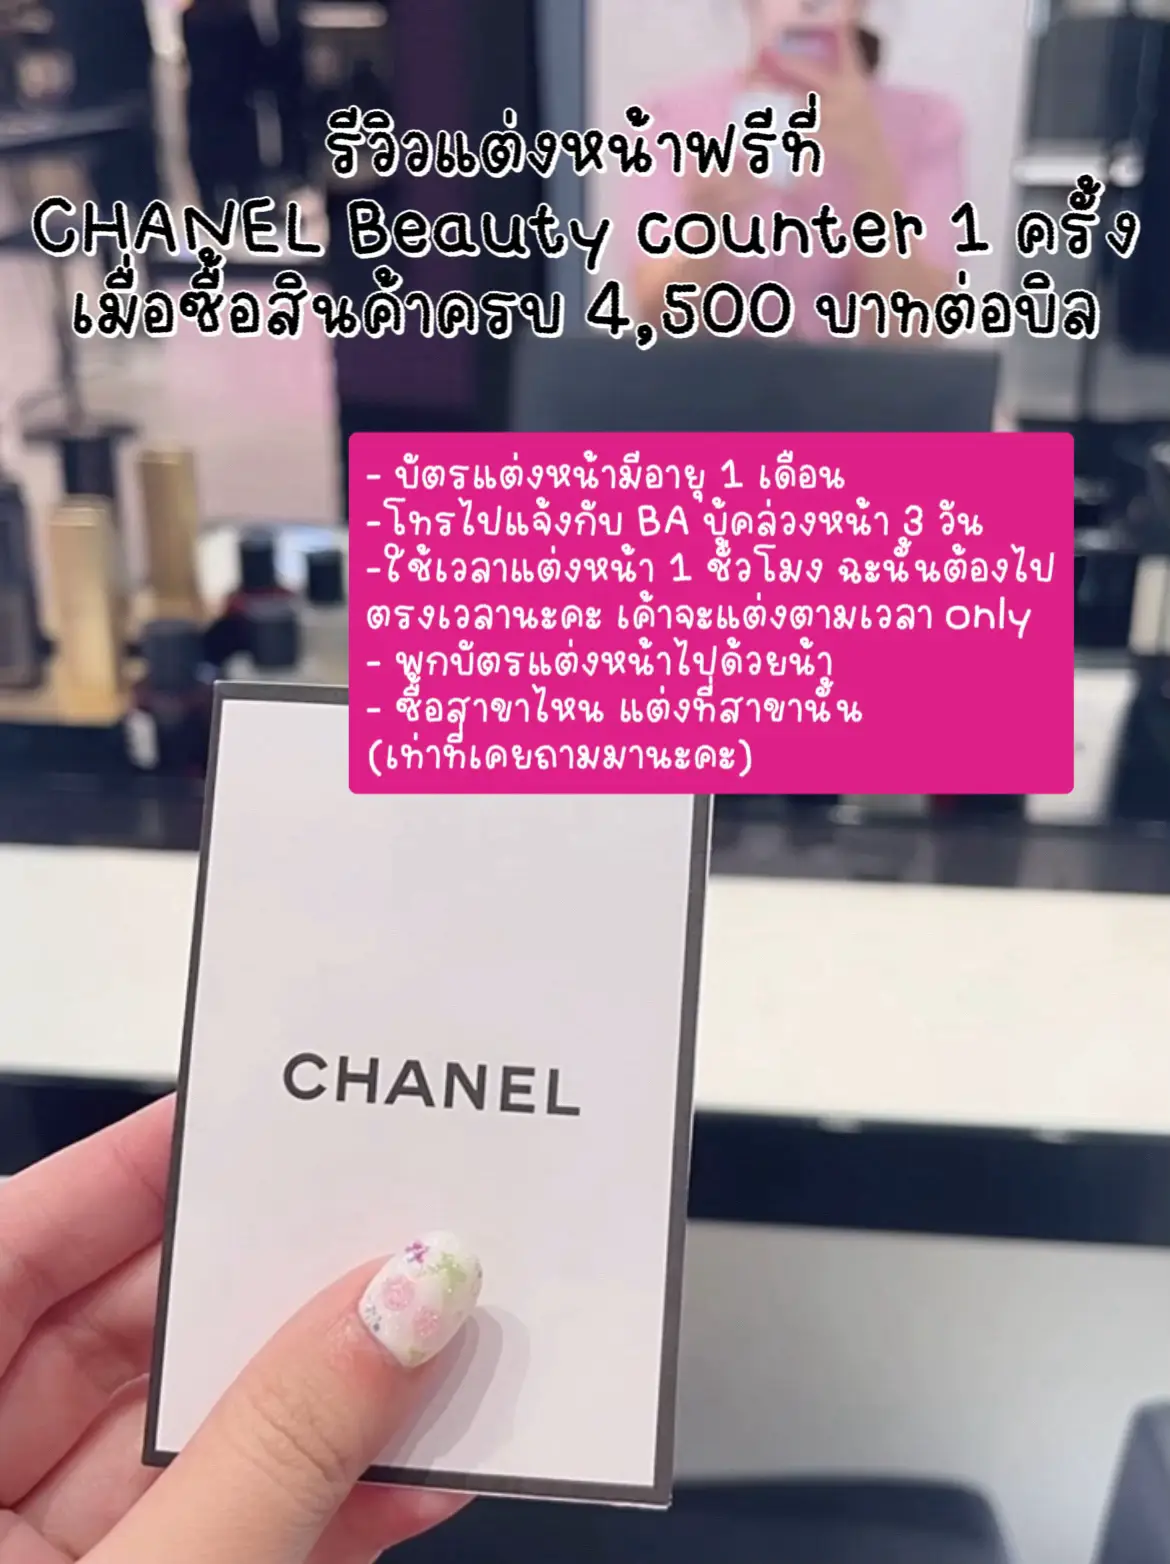 Makeup free review at CHANEL💄, Gallery posted by LittleAlice👸🏼